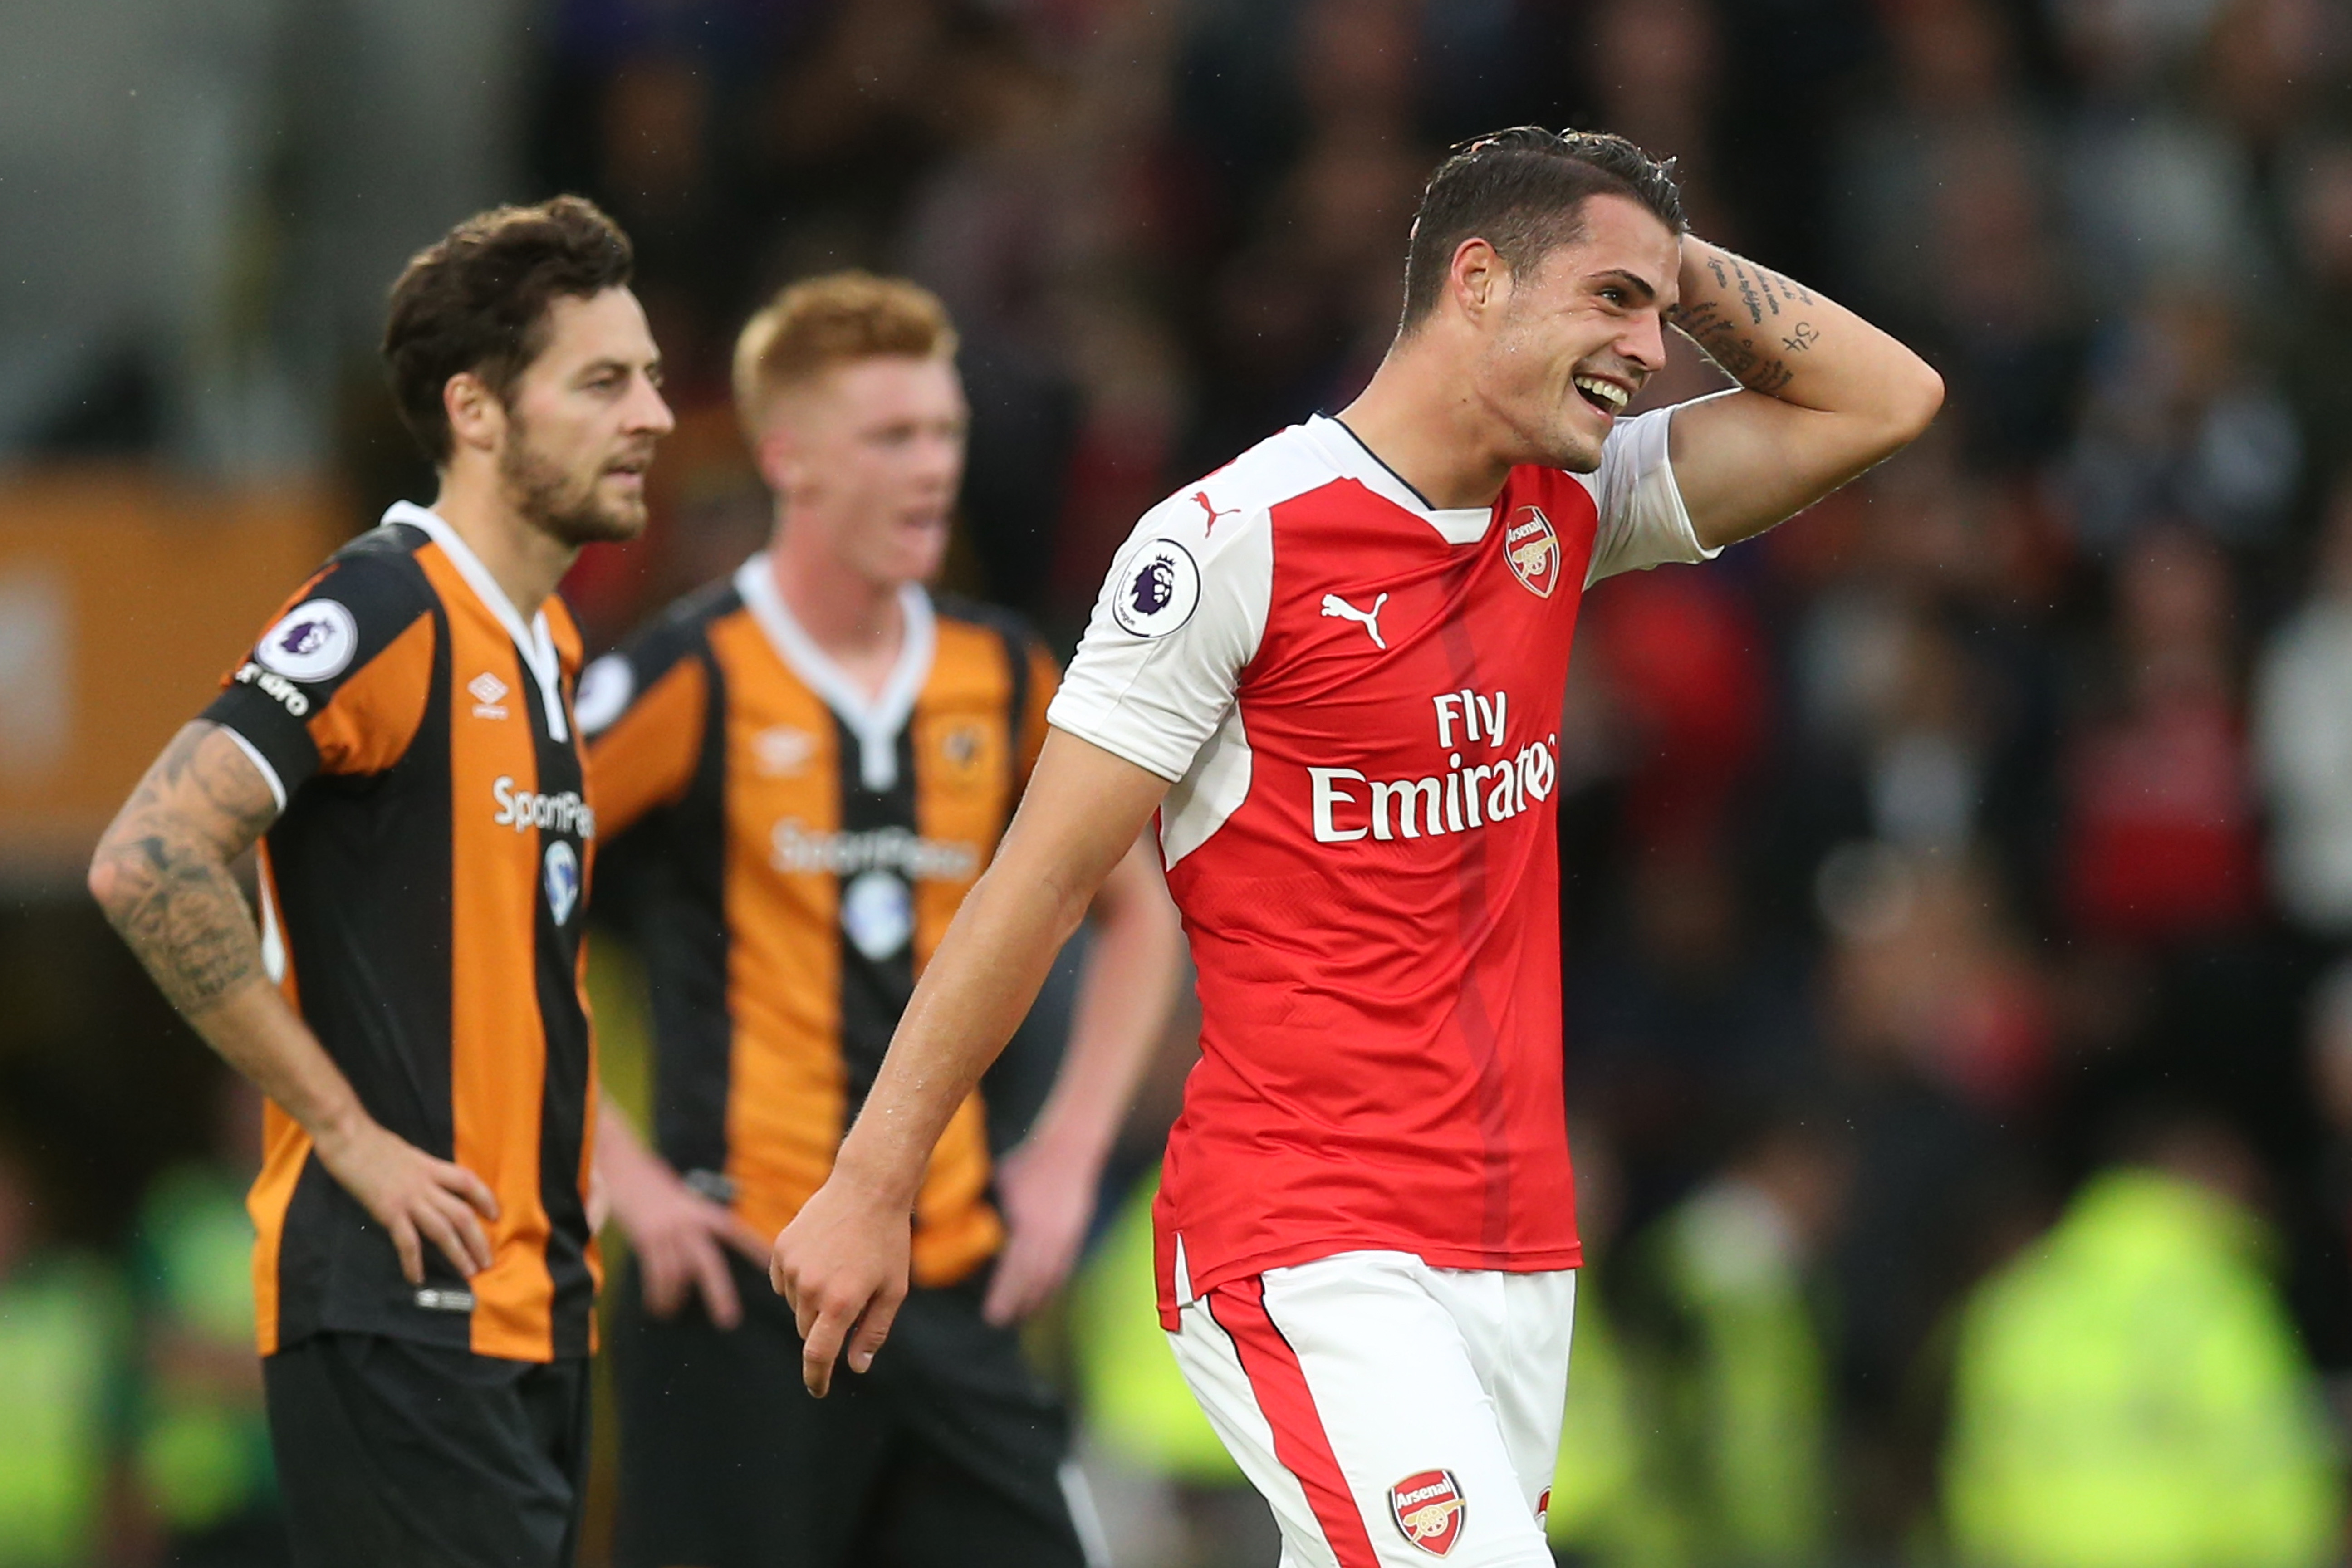 HULL, ENGLAND - SEPTEMBER 17: Granit Xhaka of Arsenal celebrates scoring his sides first goal during the Premier League match between Hull City and Arsenal at KCOM Stadium on September 17, 2016 in Hull, England.  (Photo by Alex Morton/Getty Images)